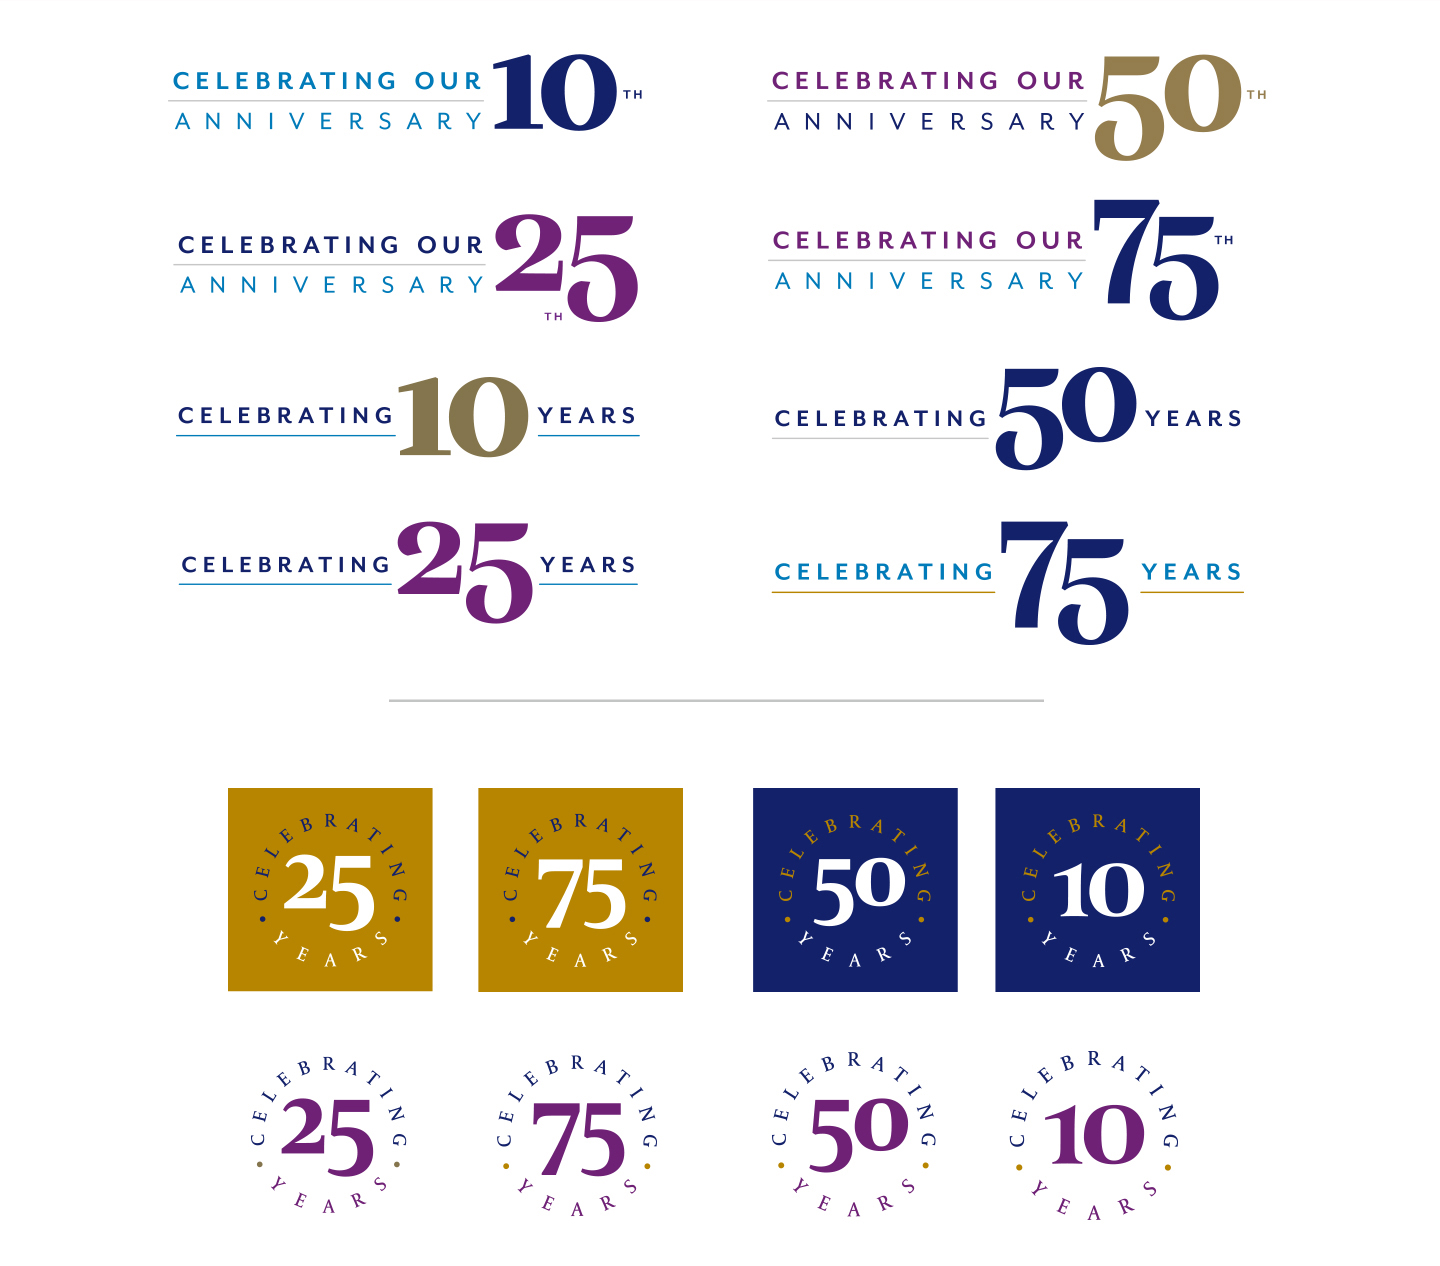 presentation of colors, graphics, and fonts used in anniversary graphics